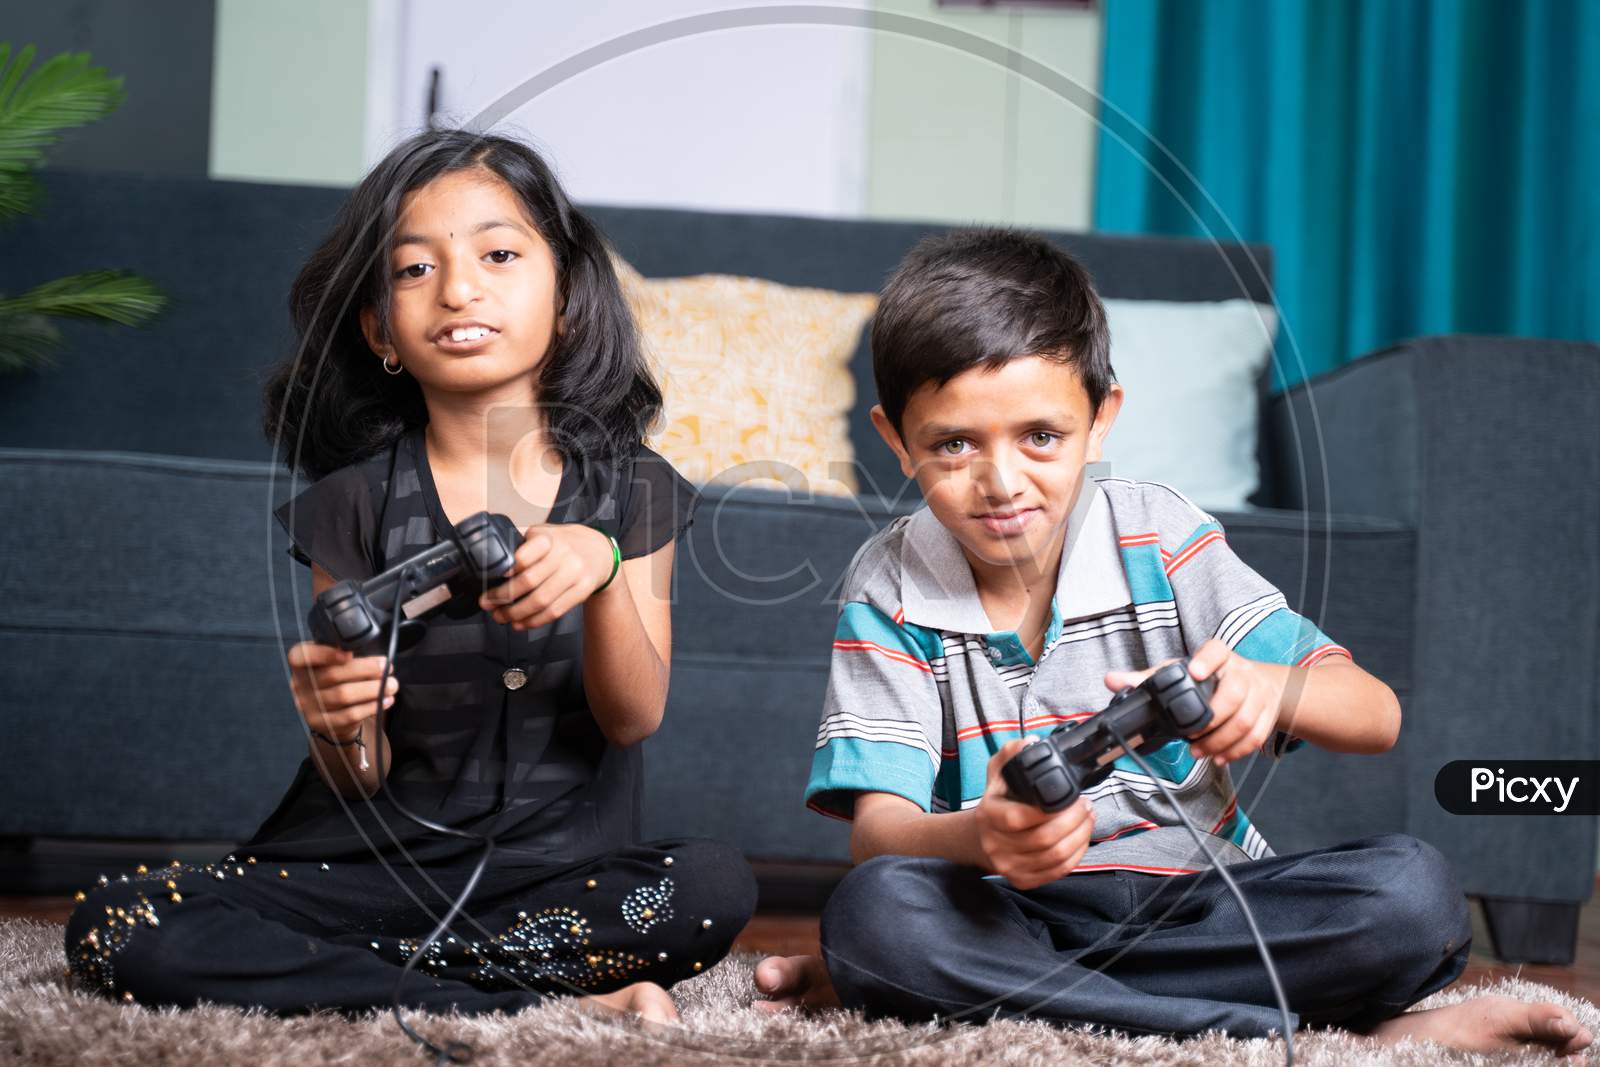 Two Kids Busy Playing Video Game Using Joystick At Home While Sitting On Floor - Concept Of Kids Game Addiction And Leisure And Weekend Activity And Lifestyle.